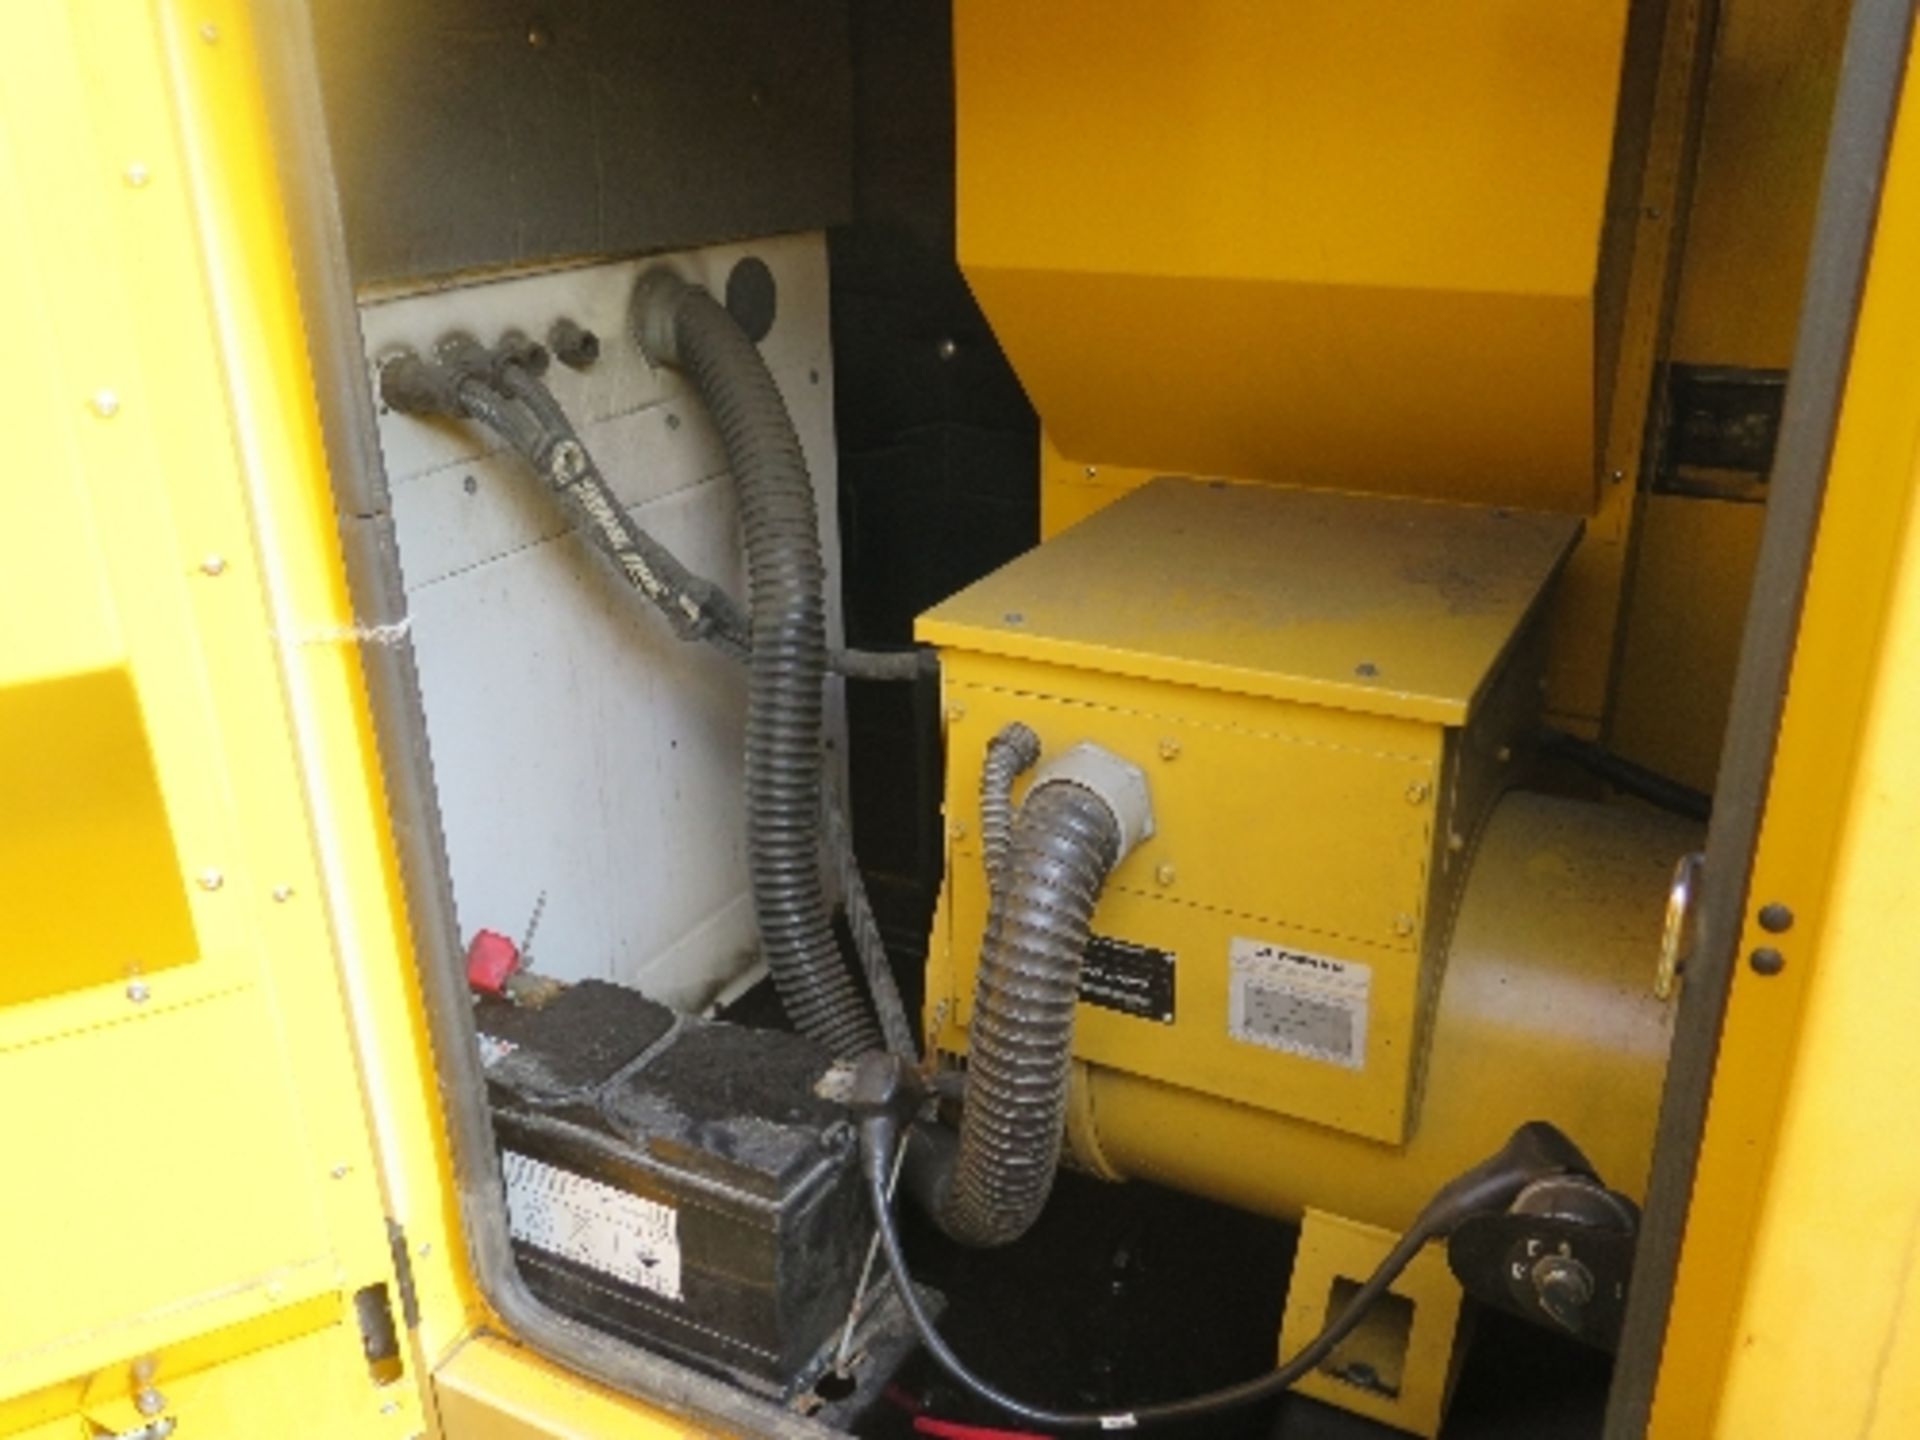 Caterpillar XQE80 generator 12997 hrs 5003857
PERKINS POWER - RUNS AND MAKES POWER
ALL LOTS are - Image 4 of 5